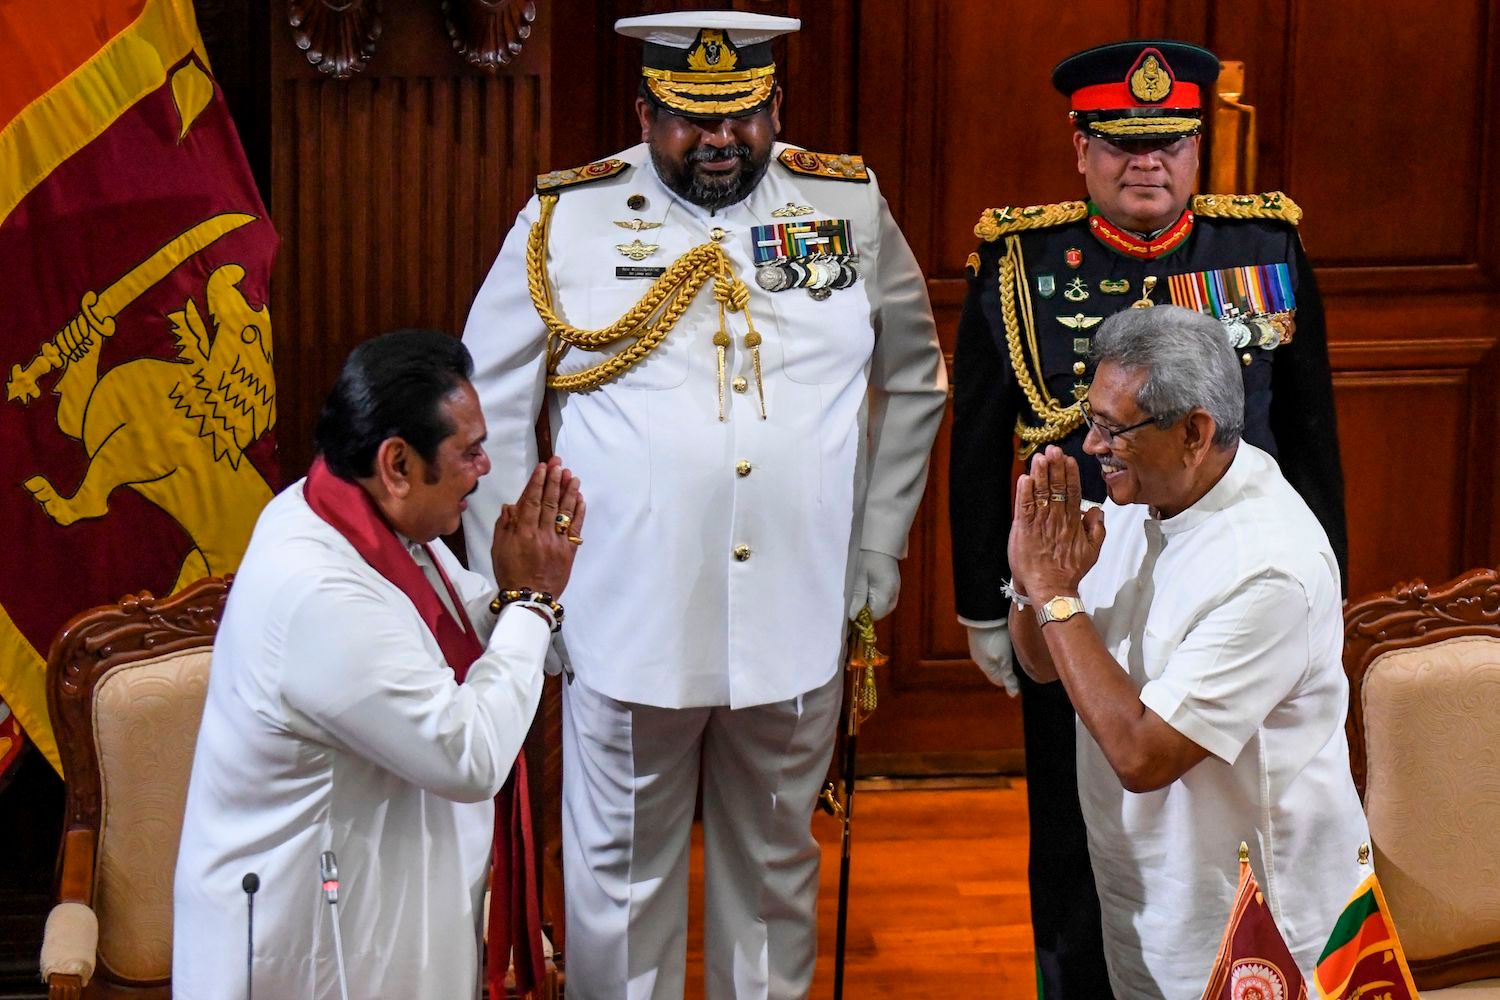 Sri Lanka's former president Mahinda Rajapaksa (L) gestures after taking oath as country's Prime Minister towards his brother, President Gotabaya Rajapaksa (R) during a ceremony in Colombo on November 21, 2019. - Newly elected Sri Lankan President Gotabaya Rajapaksa on November 20 named his brother Mahinda as Prime Minister, cementing the grip on power of a clan credited with brutally crushing the Tamil Tigers a decade ago. (Photo by LAKRUWAN WANNIARACHCHI / AFP) (Photo by LAKRUWAN WANNIARACHCHI/AFP via Getty Images)